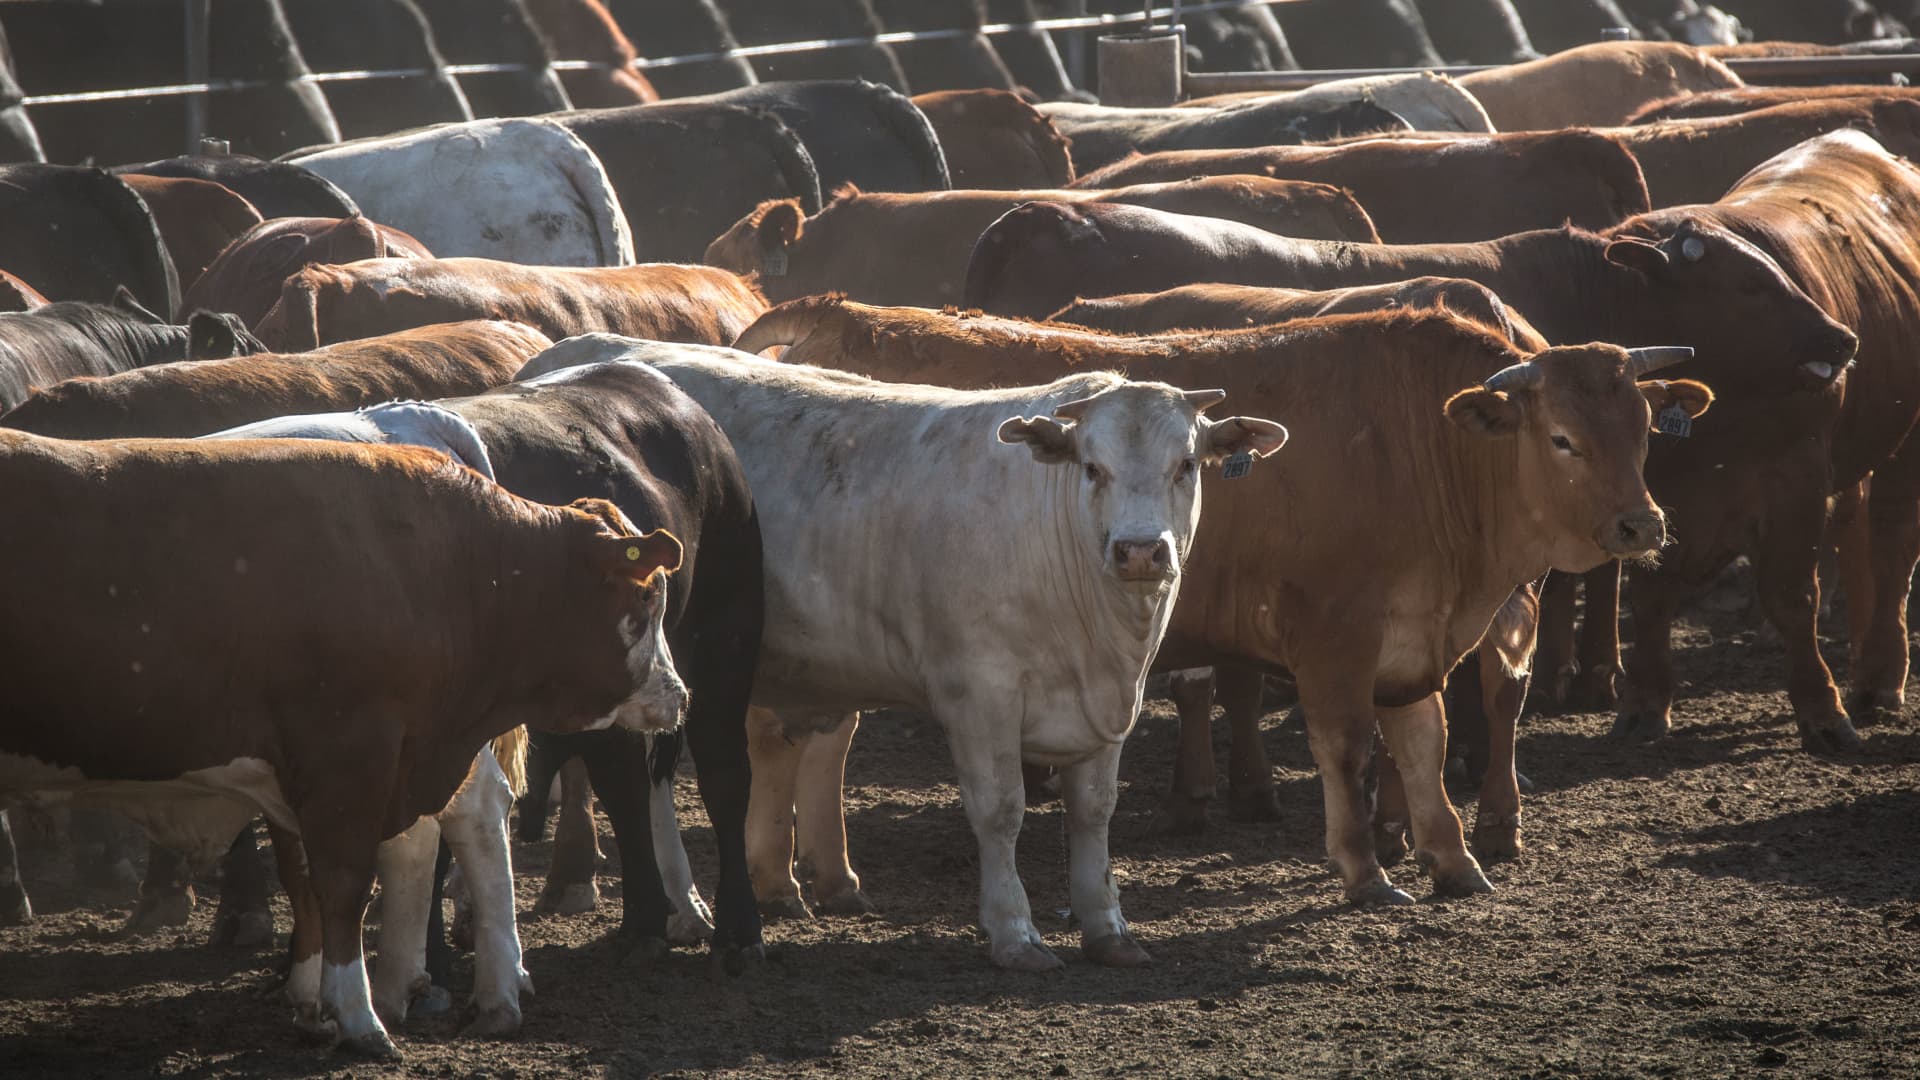 The Harris Cattle Ranch feedlot, located along Interstate 5, is the largest producer of beef in California and can produce 150 million pounds of beef a year as viewed on May 31, 2021, near Harris Ranch, California.